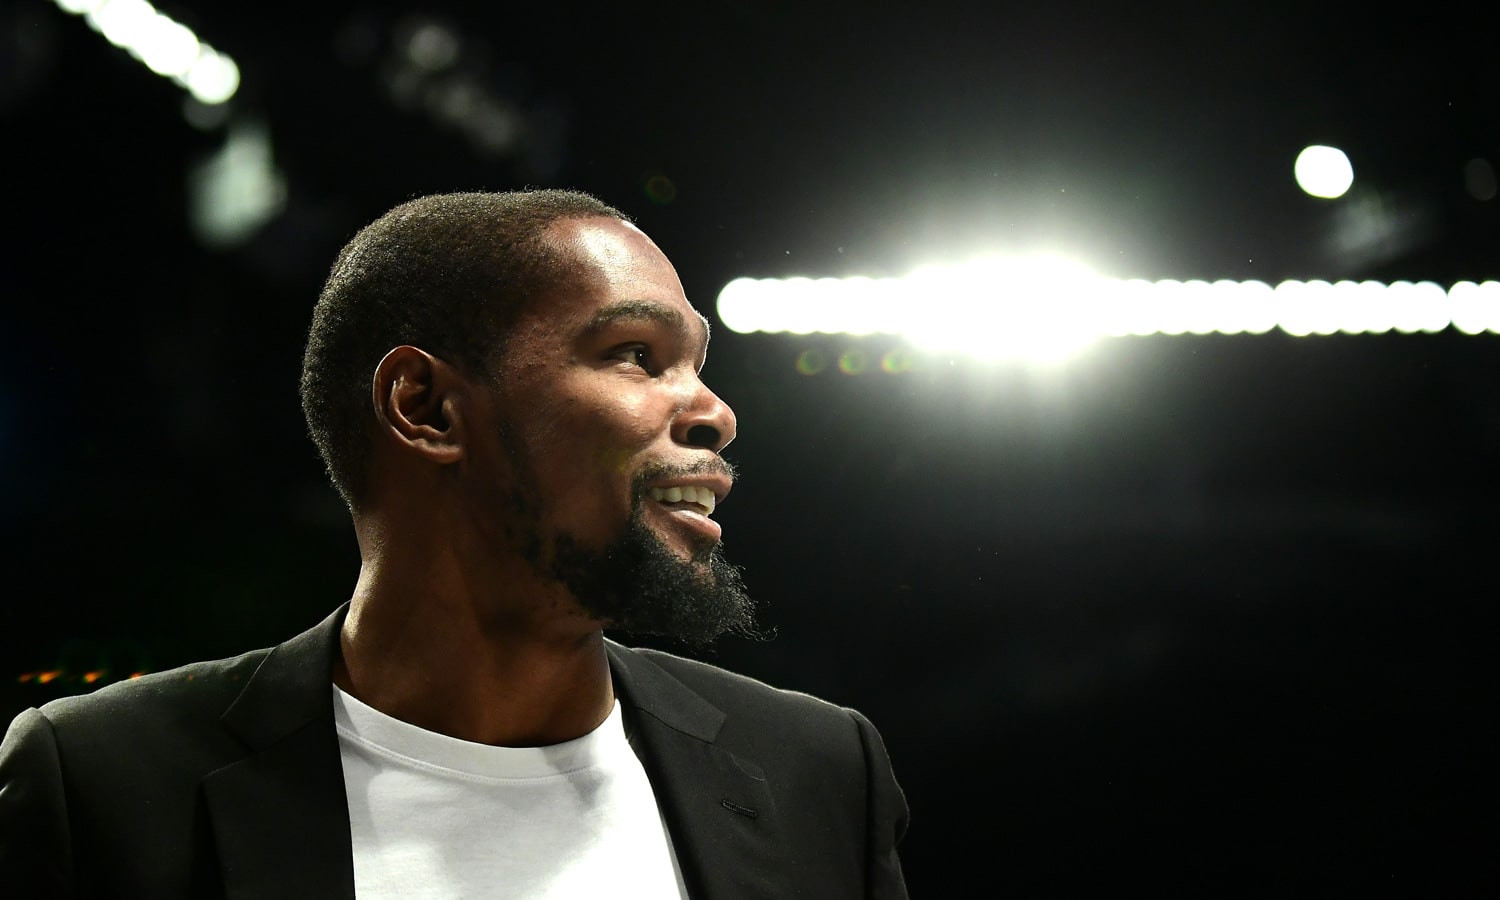 Kevin Durant Becomes Marijuana Advocate For NBA Players